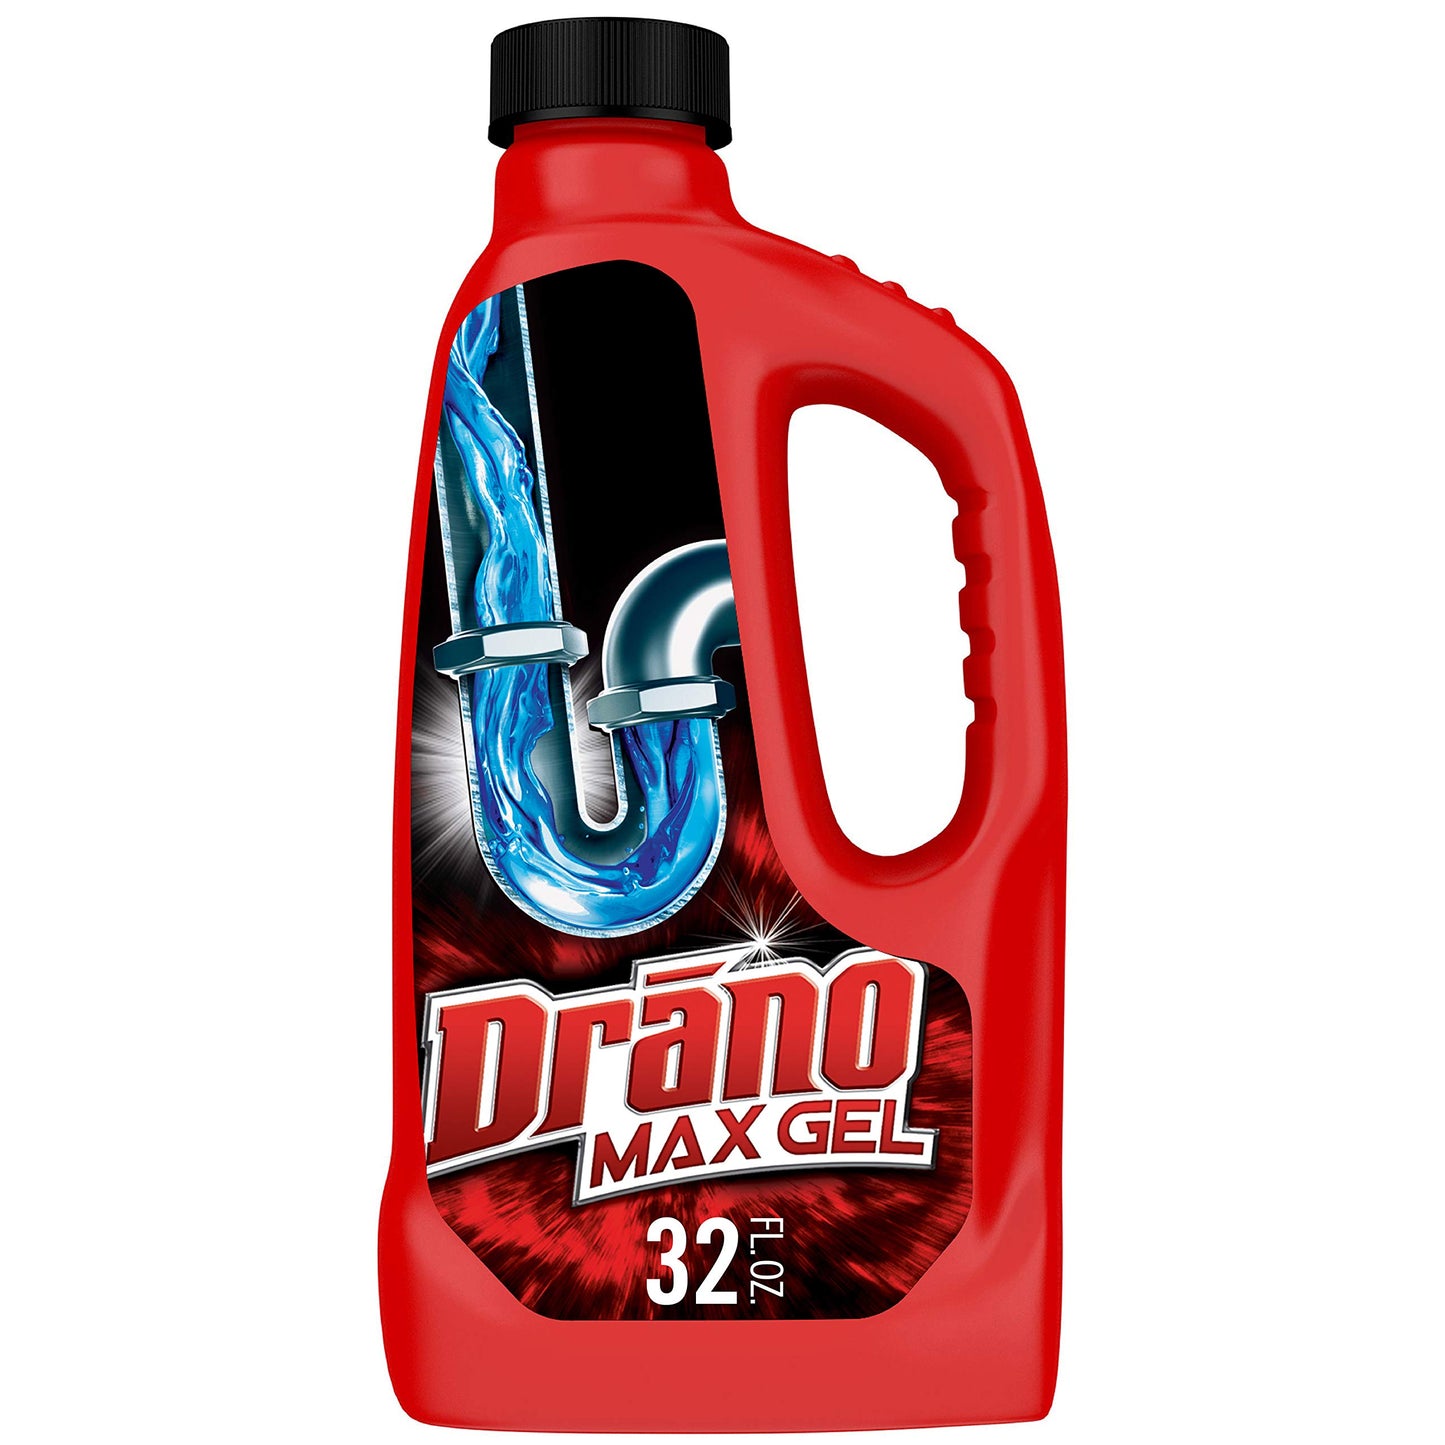 Drano Max Gel Drain Clog Remover and Cleaner for Shower or Sink Drains, Unclogs and Removes Hair, Soap Scum, Blockages,32oz